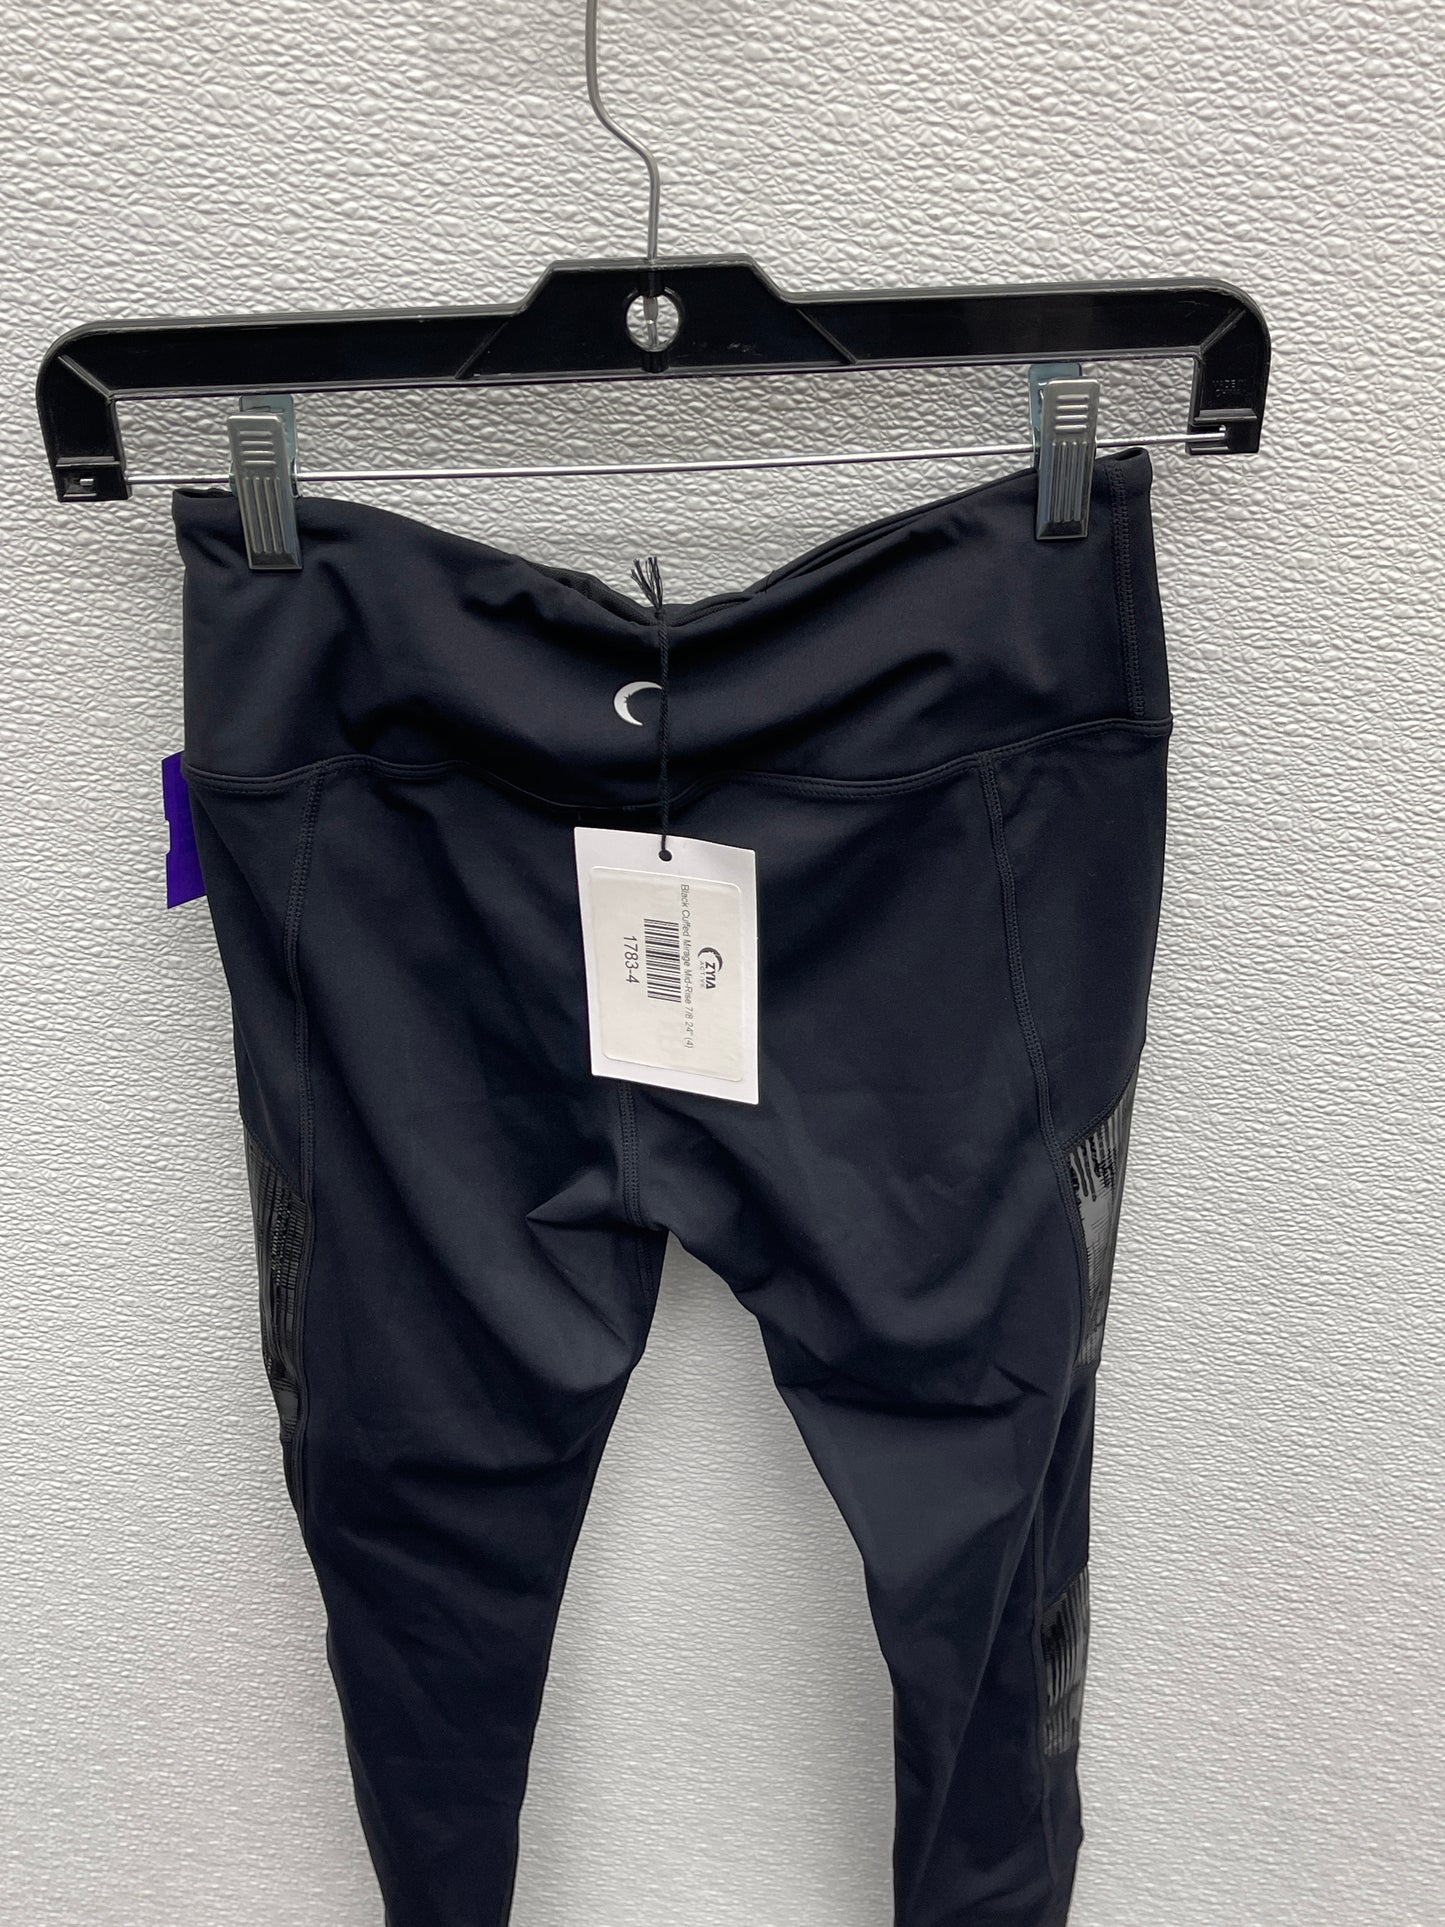 Athletic Leggings By Zyia  Size: 4